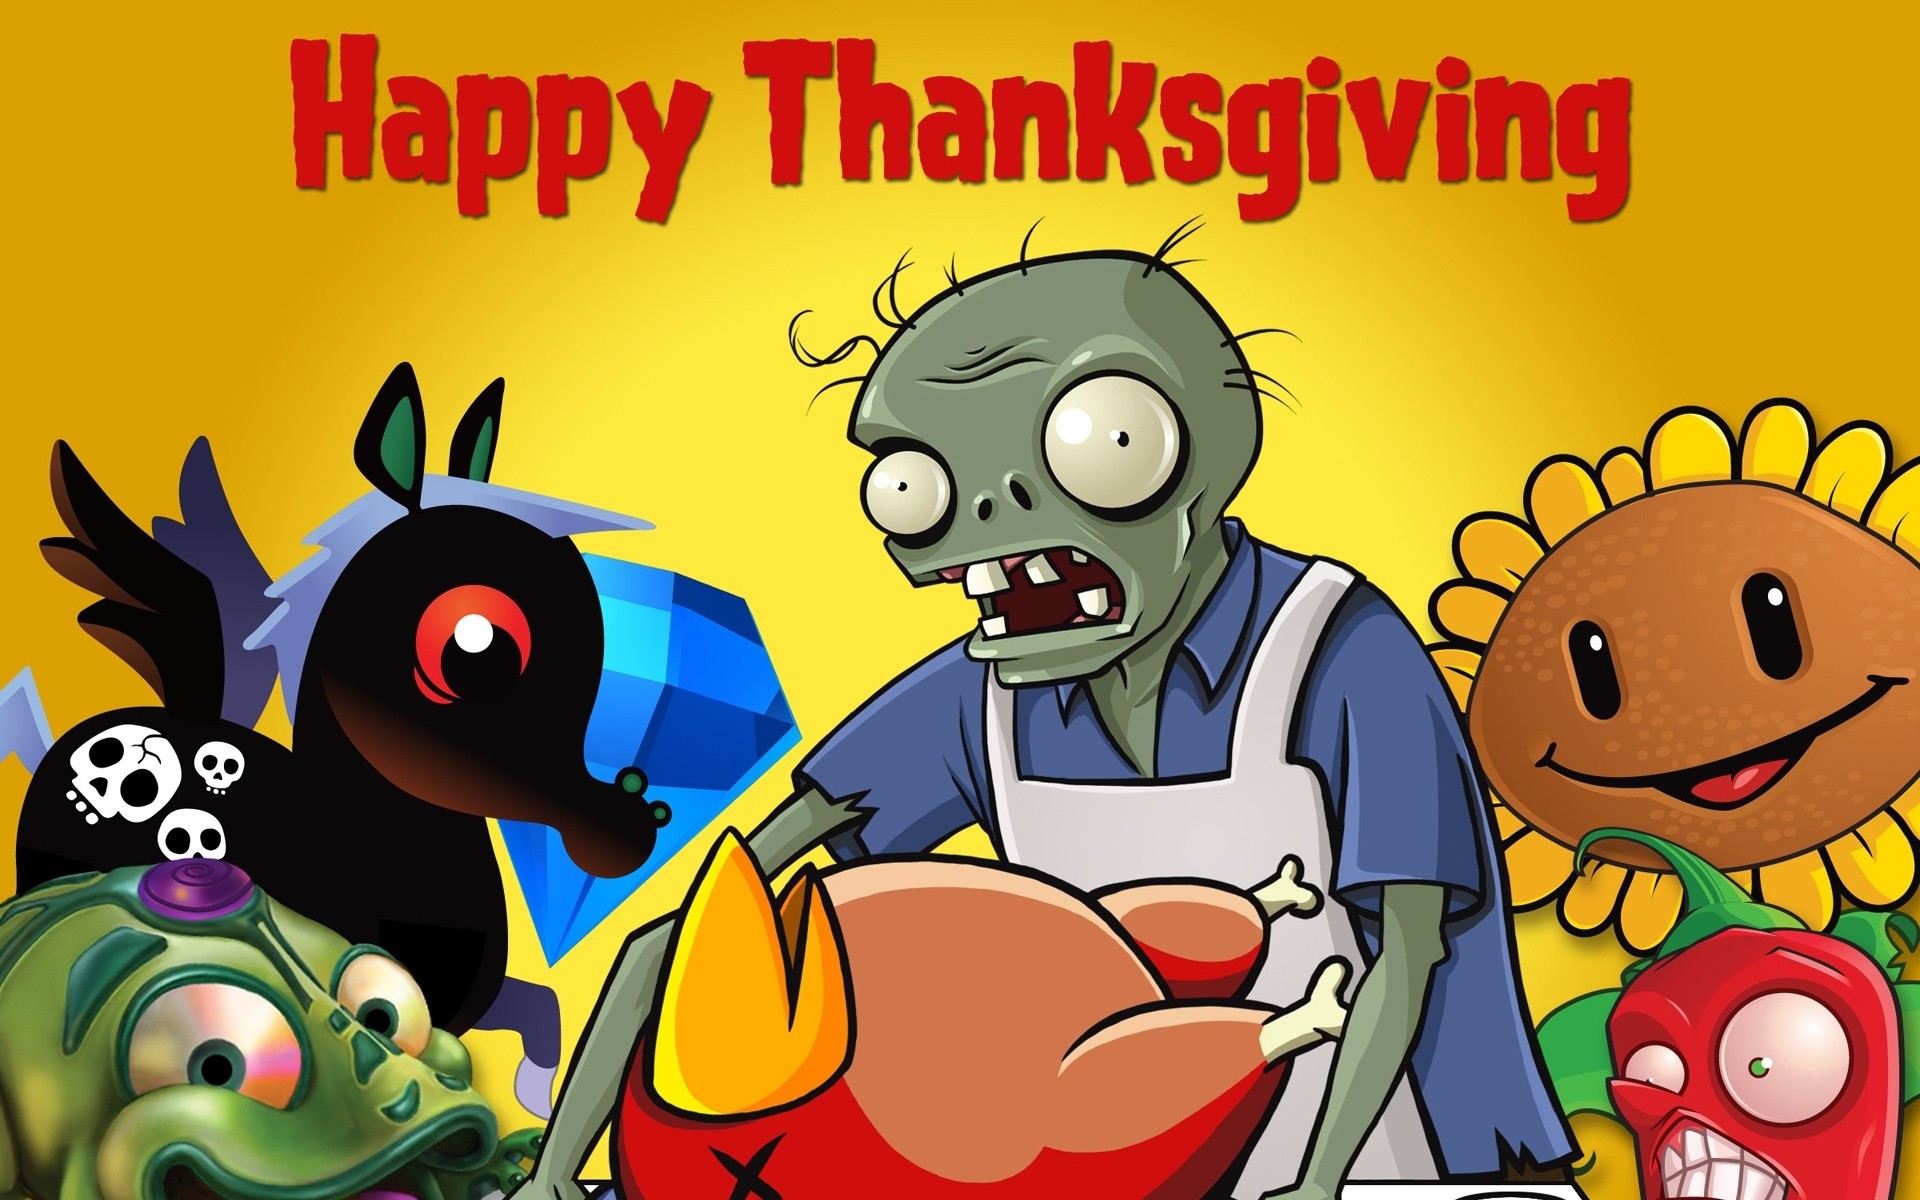 Cute Thanksgiving Wallpapers for Desktop (60+ images)